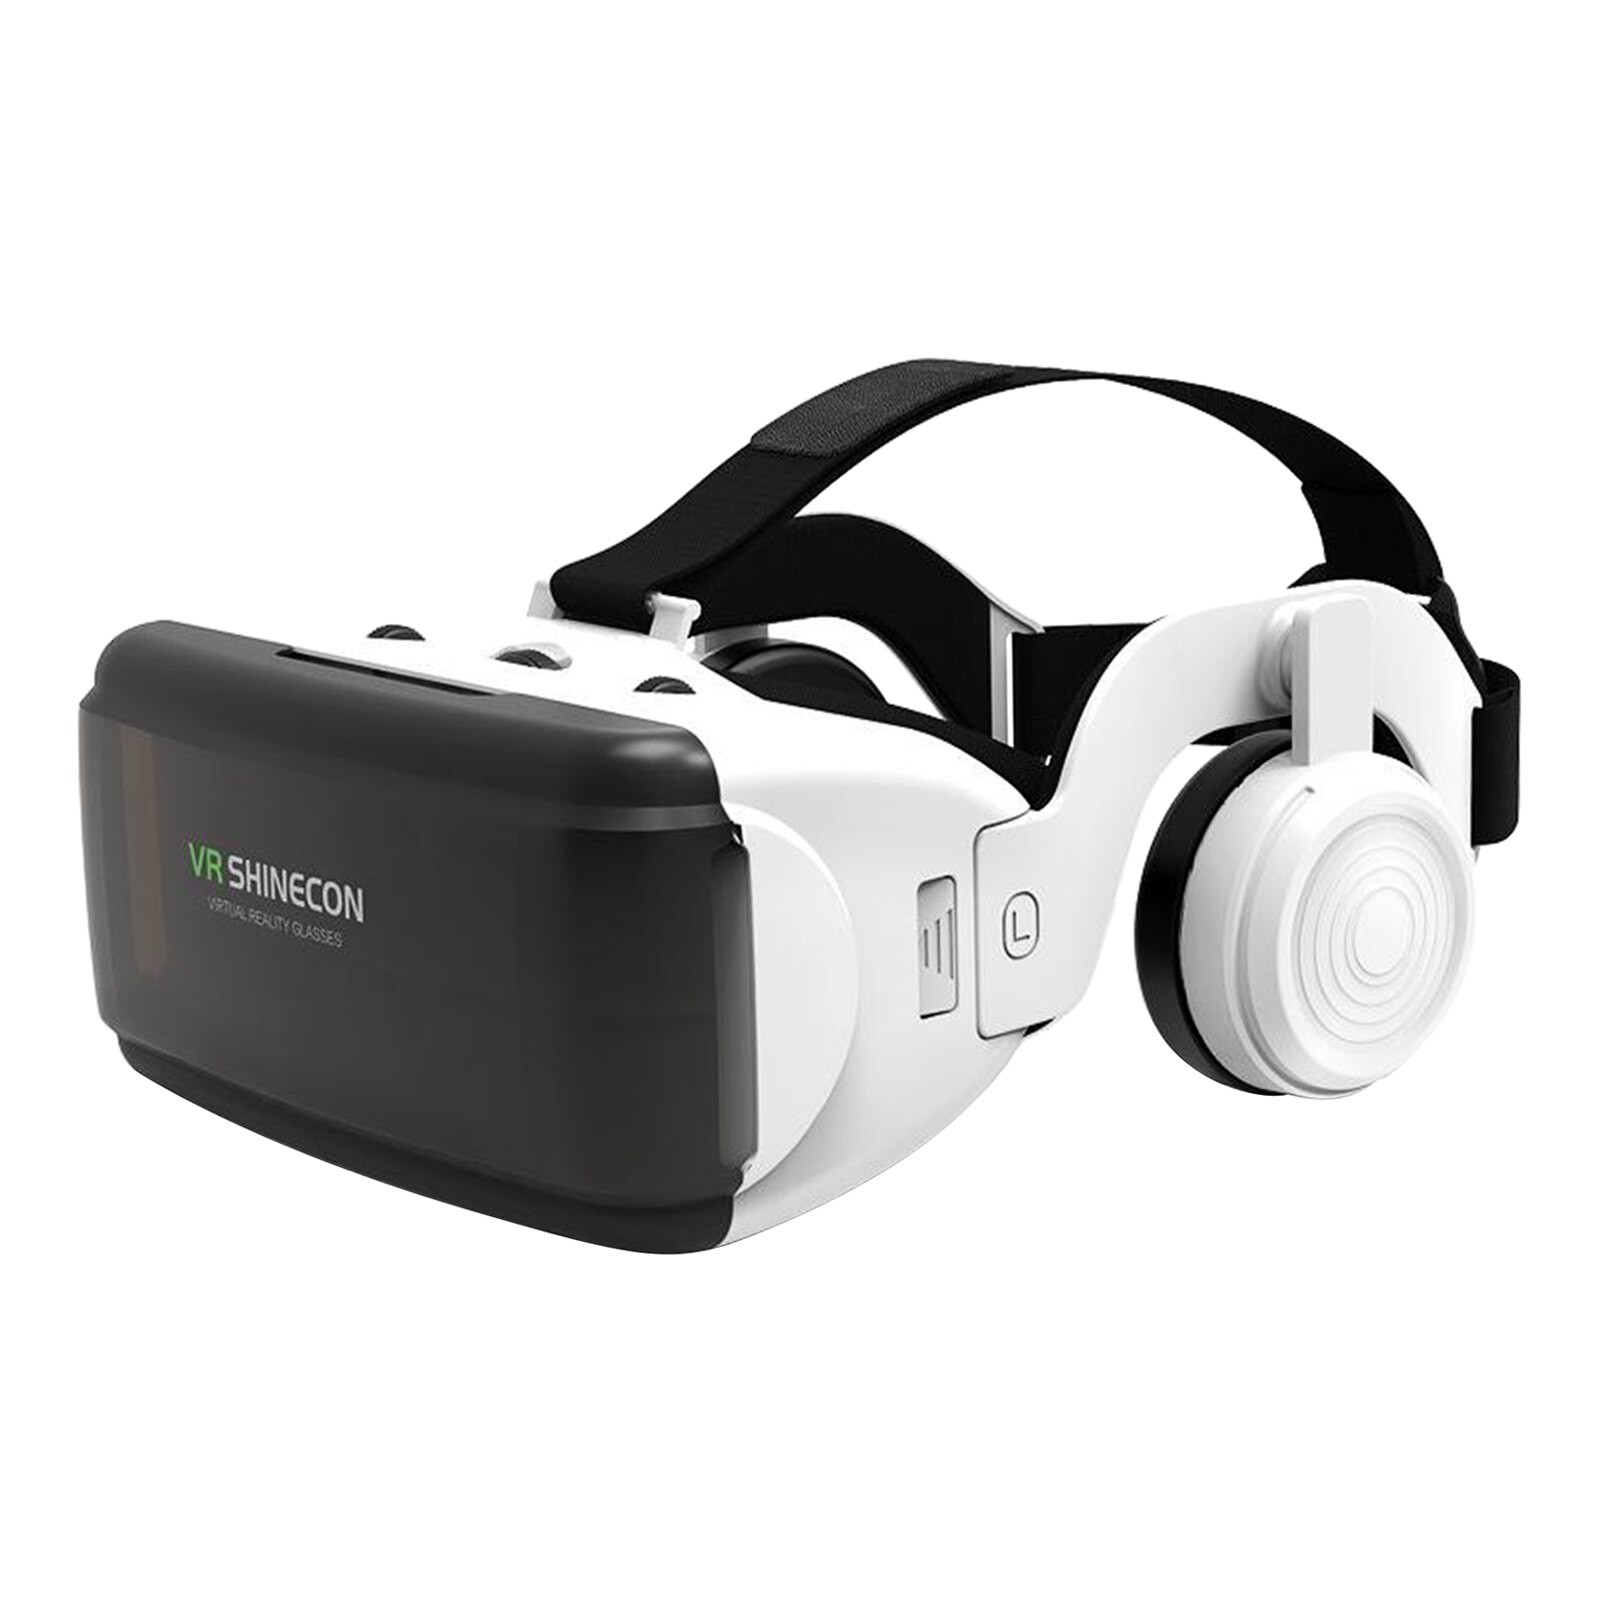 3D Vr Headset Virtual Reality Glas Goggles Headset Voor Telefoons 4.7-6.53"